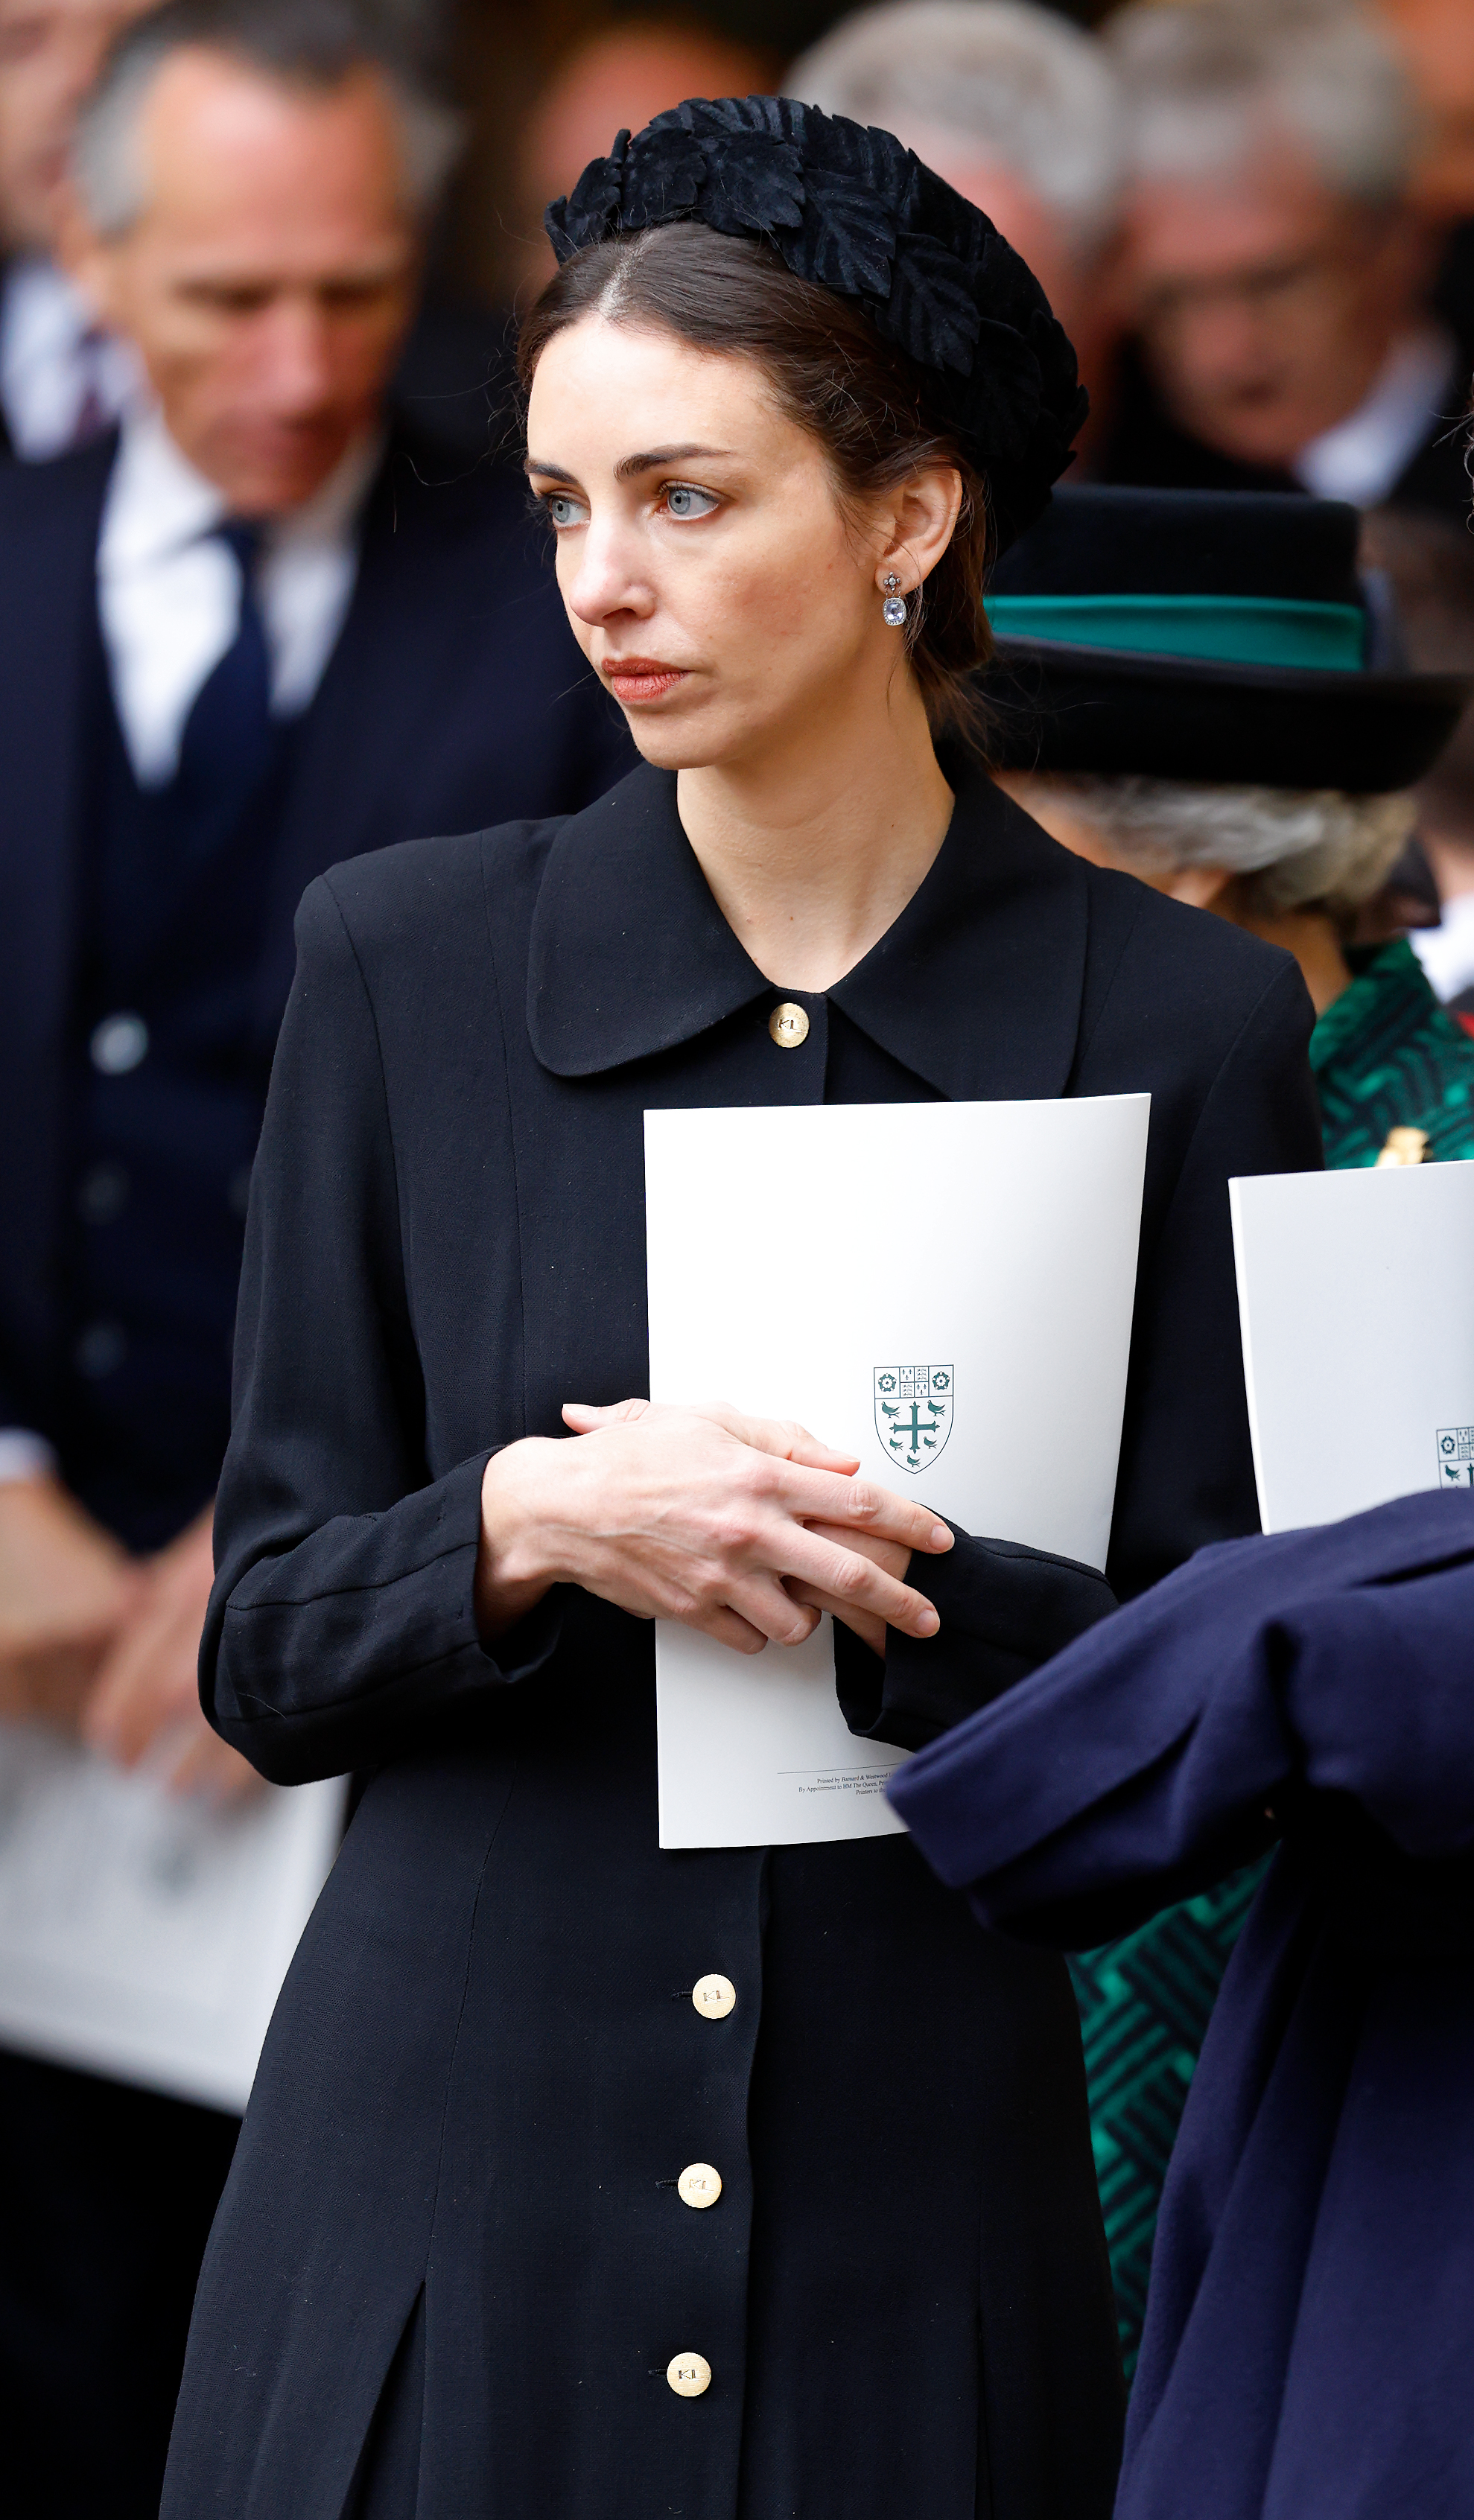 Rose Hanbury, Marchioness of Cholmondeley attends a Service of Thanksgiving for the life of Prince Philip, Duke of Edinburgh at Westminster Abbey on March 29, 2022 in London, England | Source: Getty Images